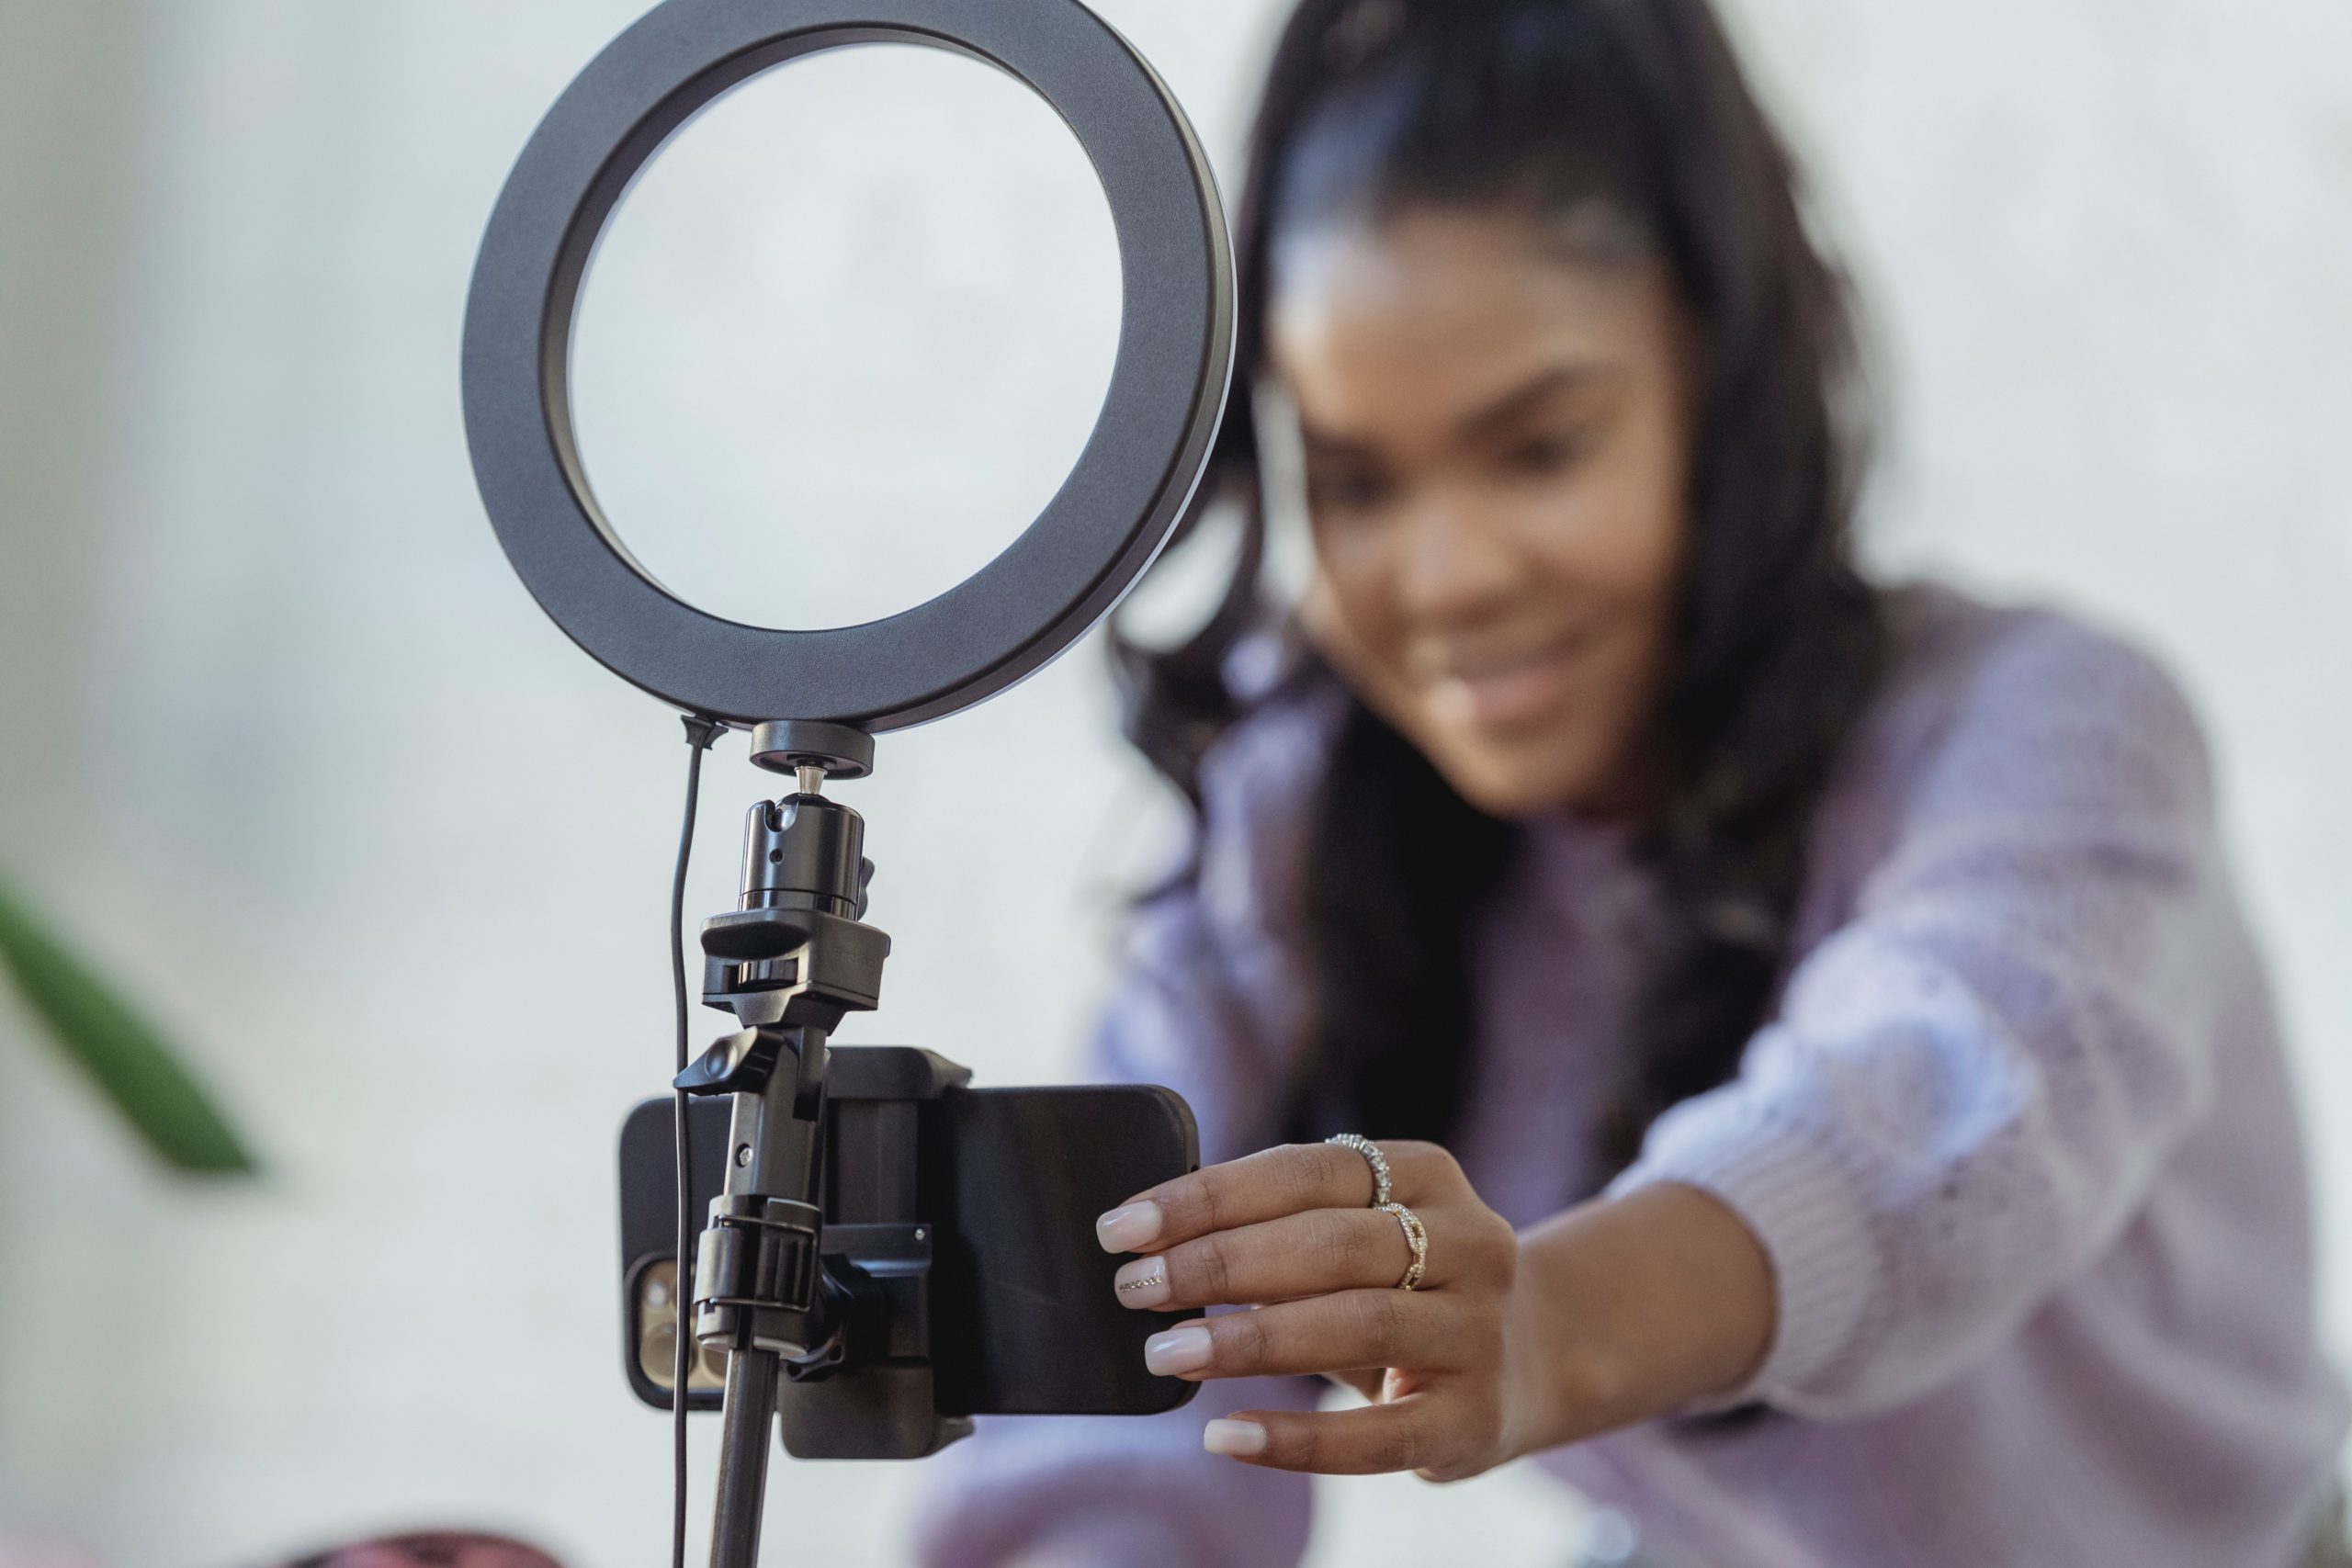 Woman adjusting cameral mounted on ring light